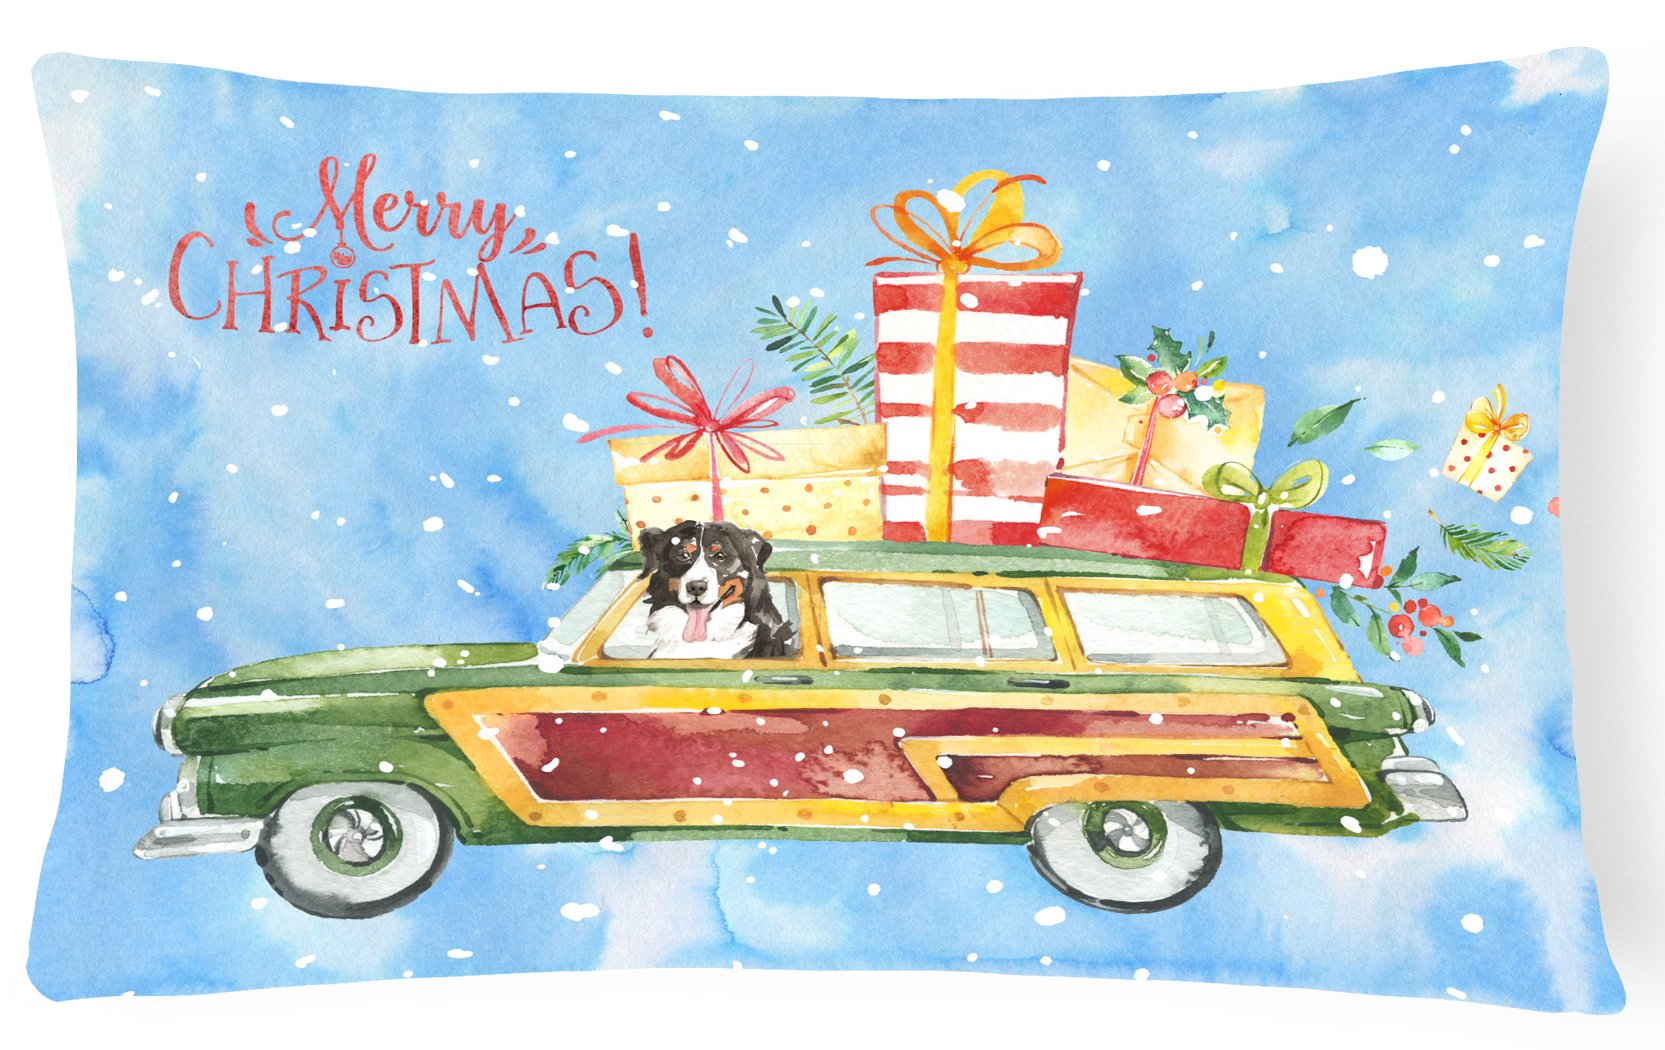 Merry Christmas Bernese Mountain Dog Canvas Fabric Decorative Pillow CK2394PW1216 by Caroline's Treasures